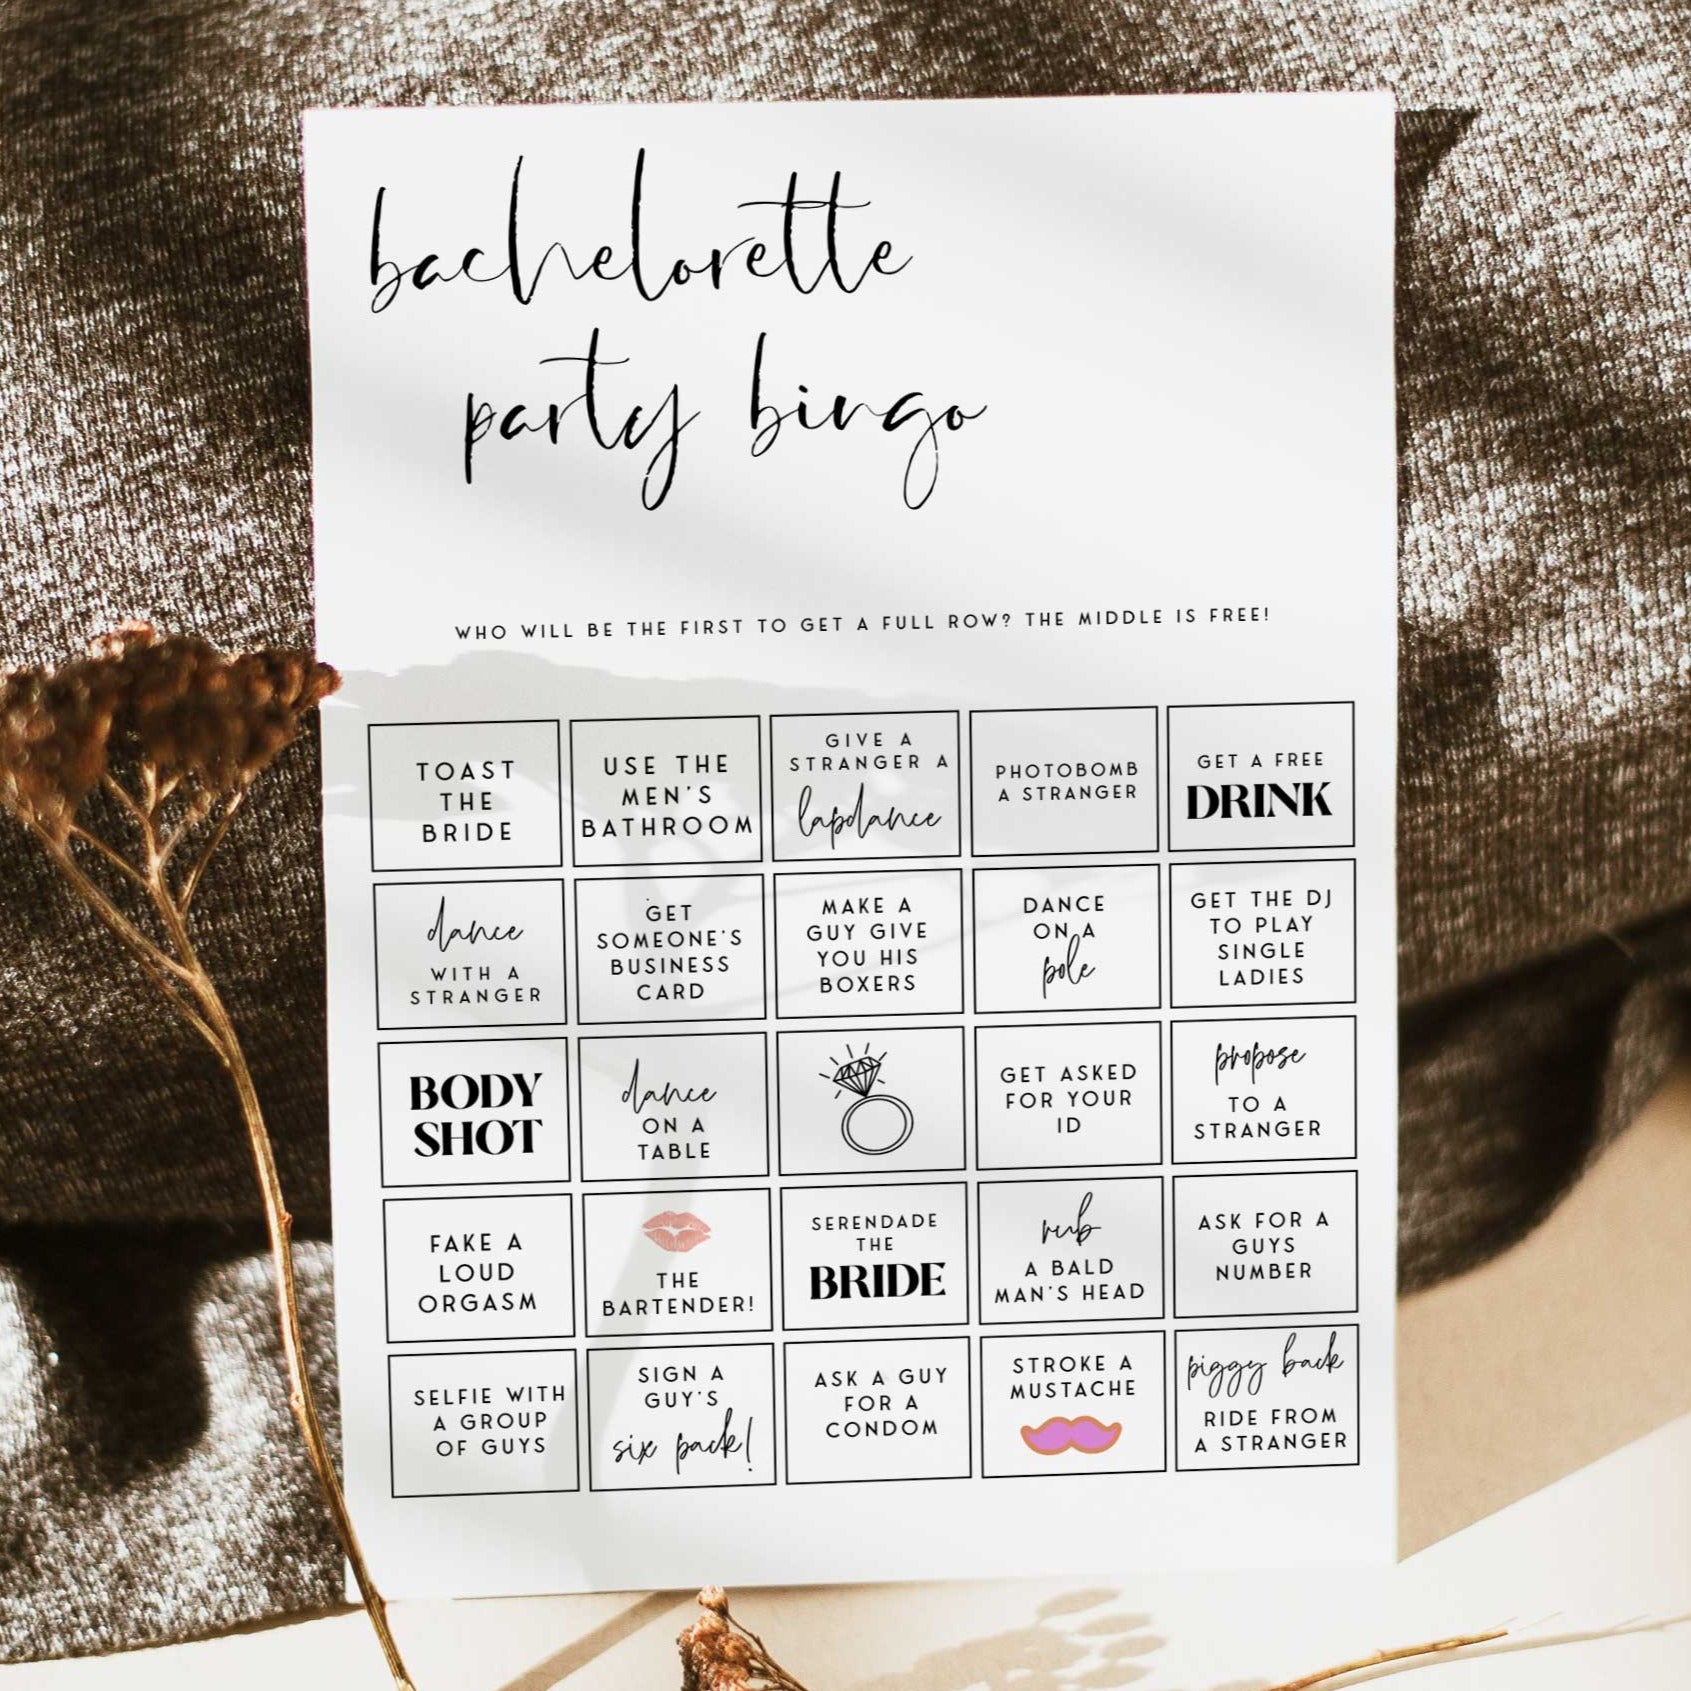 Fully editable and printable bridal shower bachelorette party bingo game with a modern minimalist design. Perfect for a modern simple bridal shower themed party